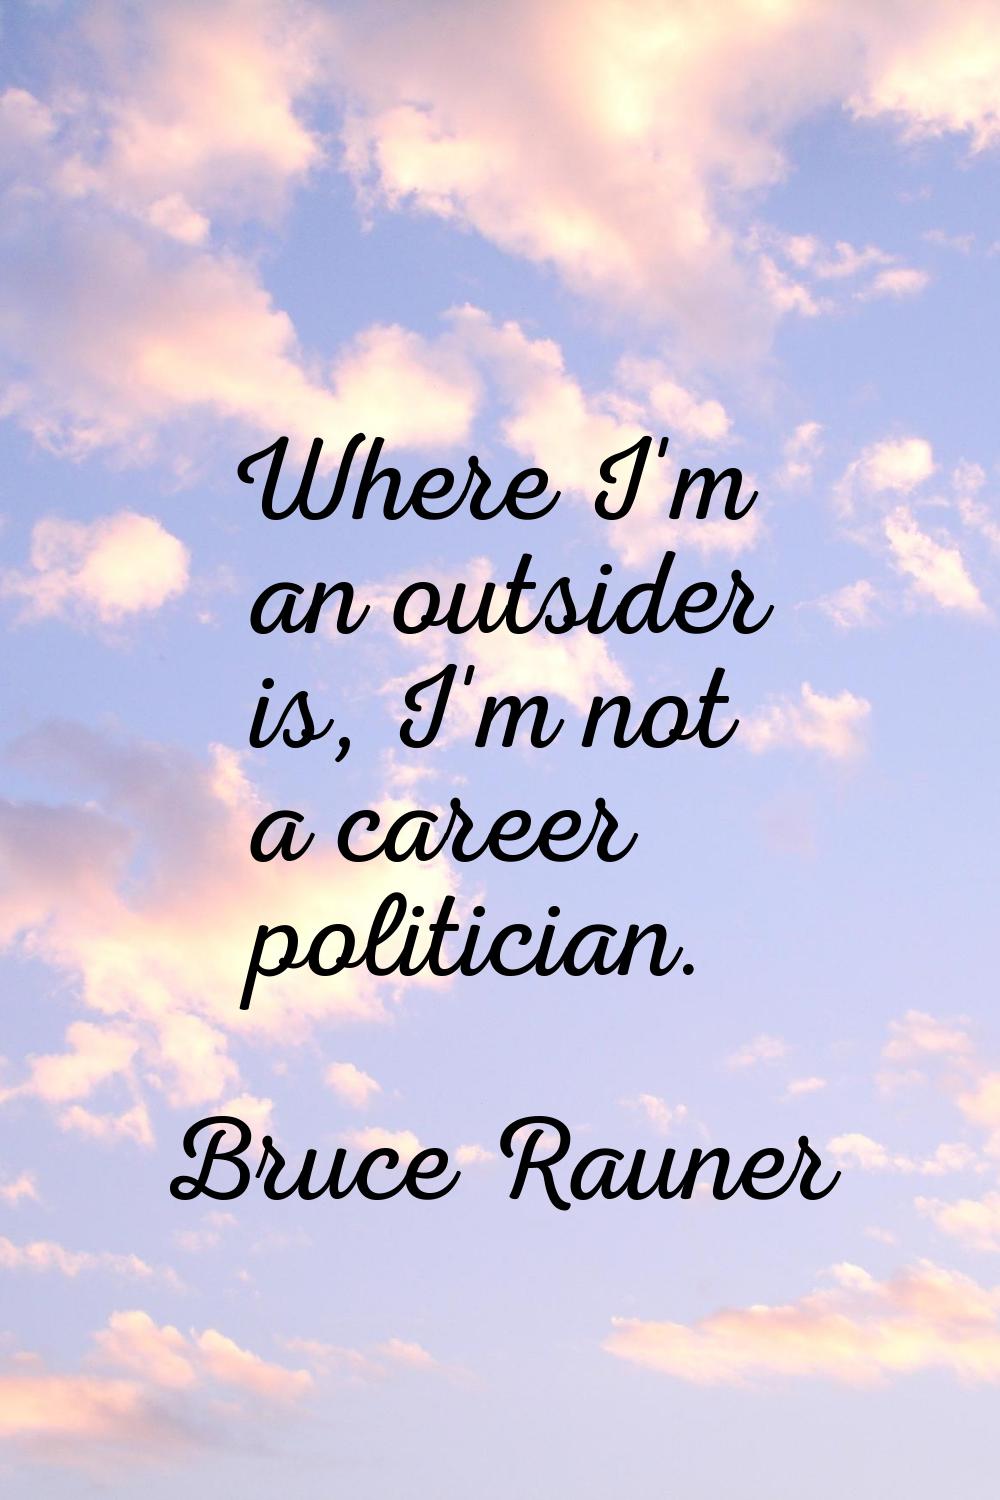 Where I'm an outsider is, I'm not a career politician.